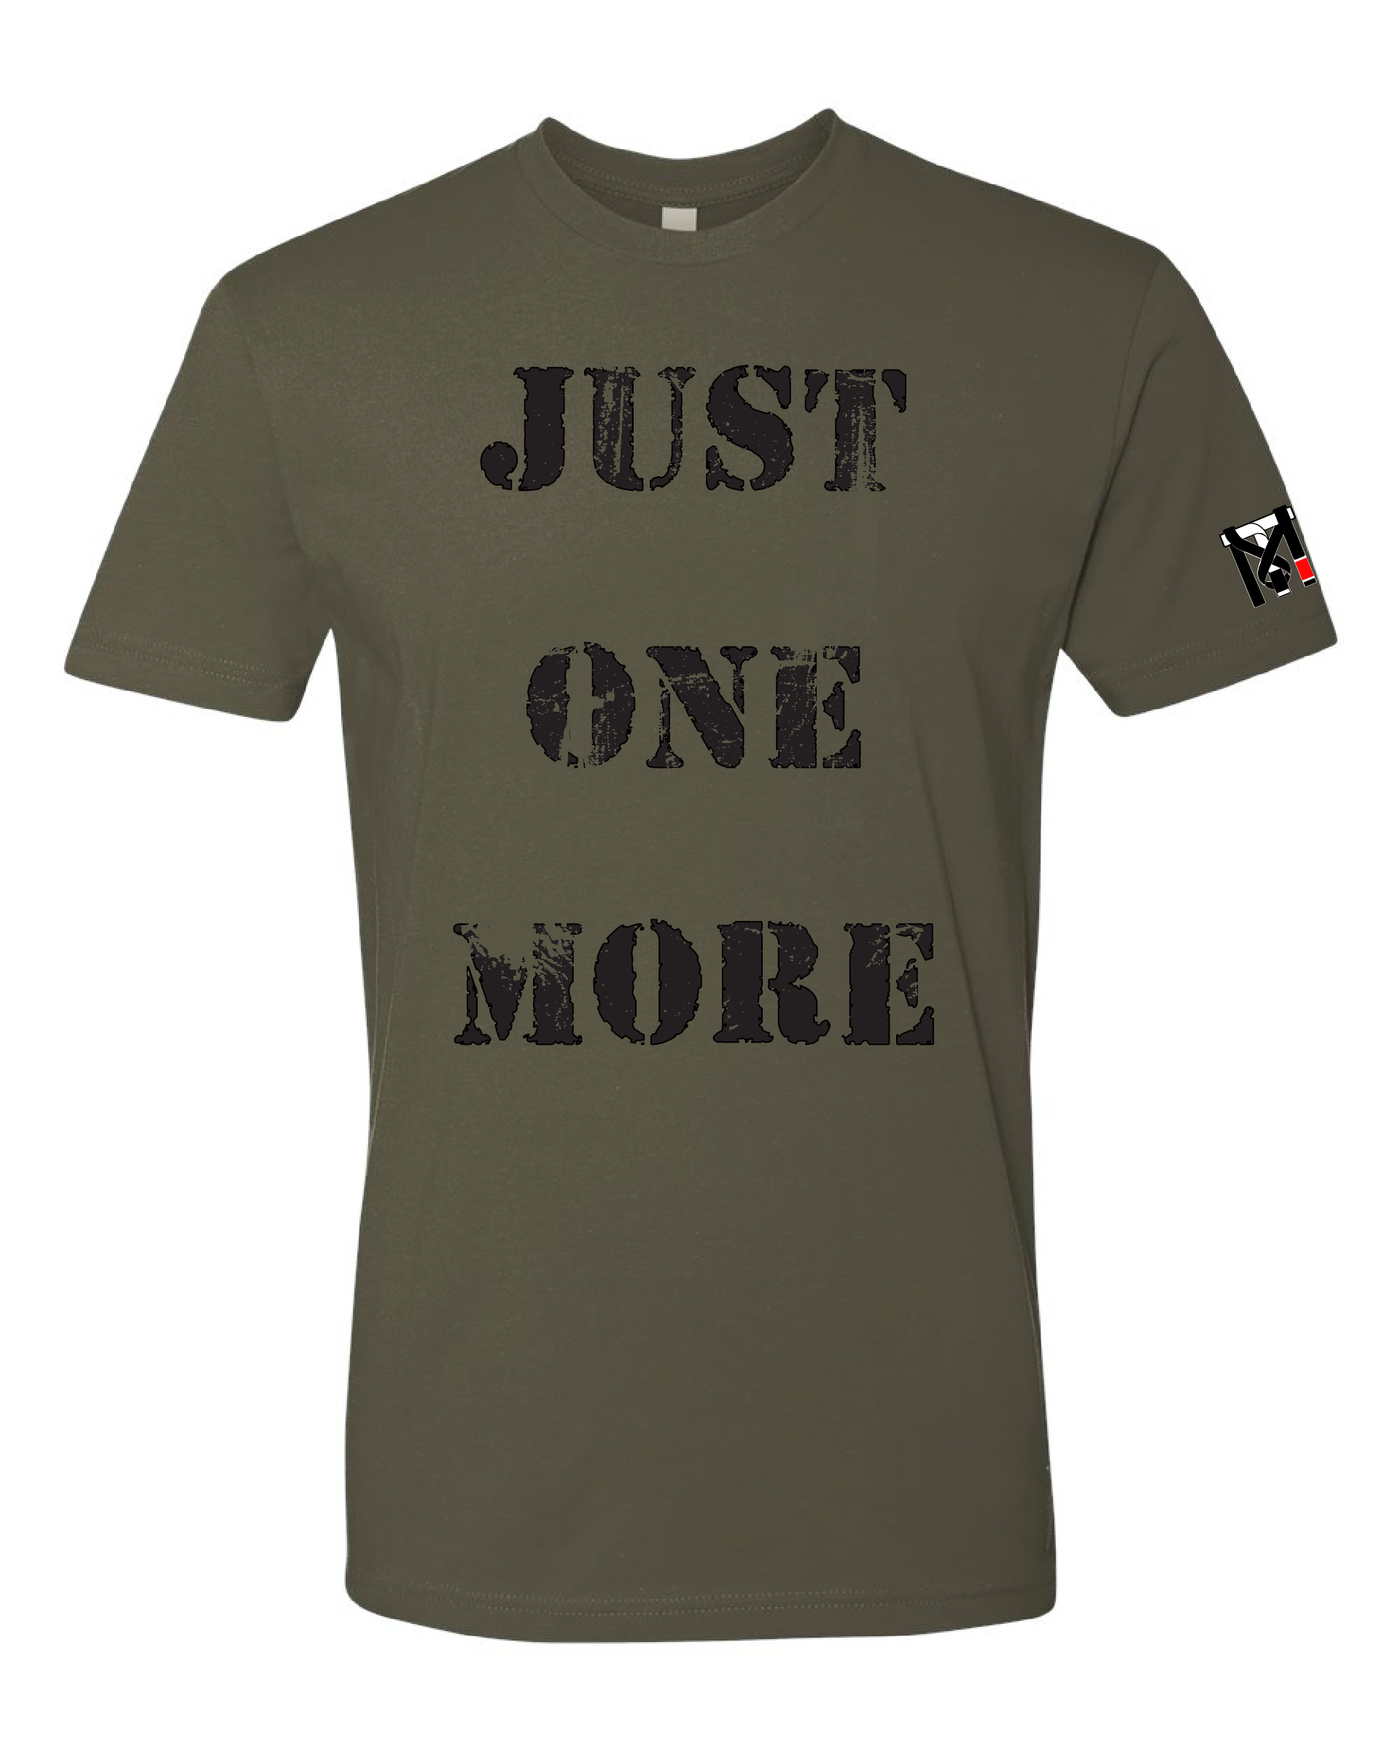 The Just One More Tee